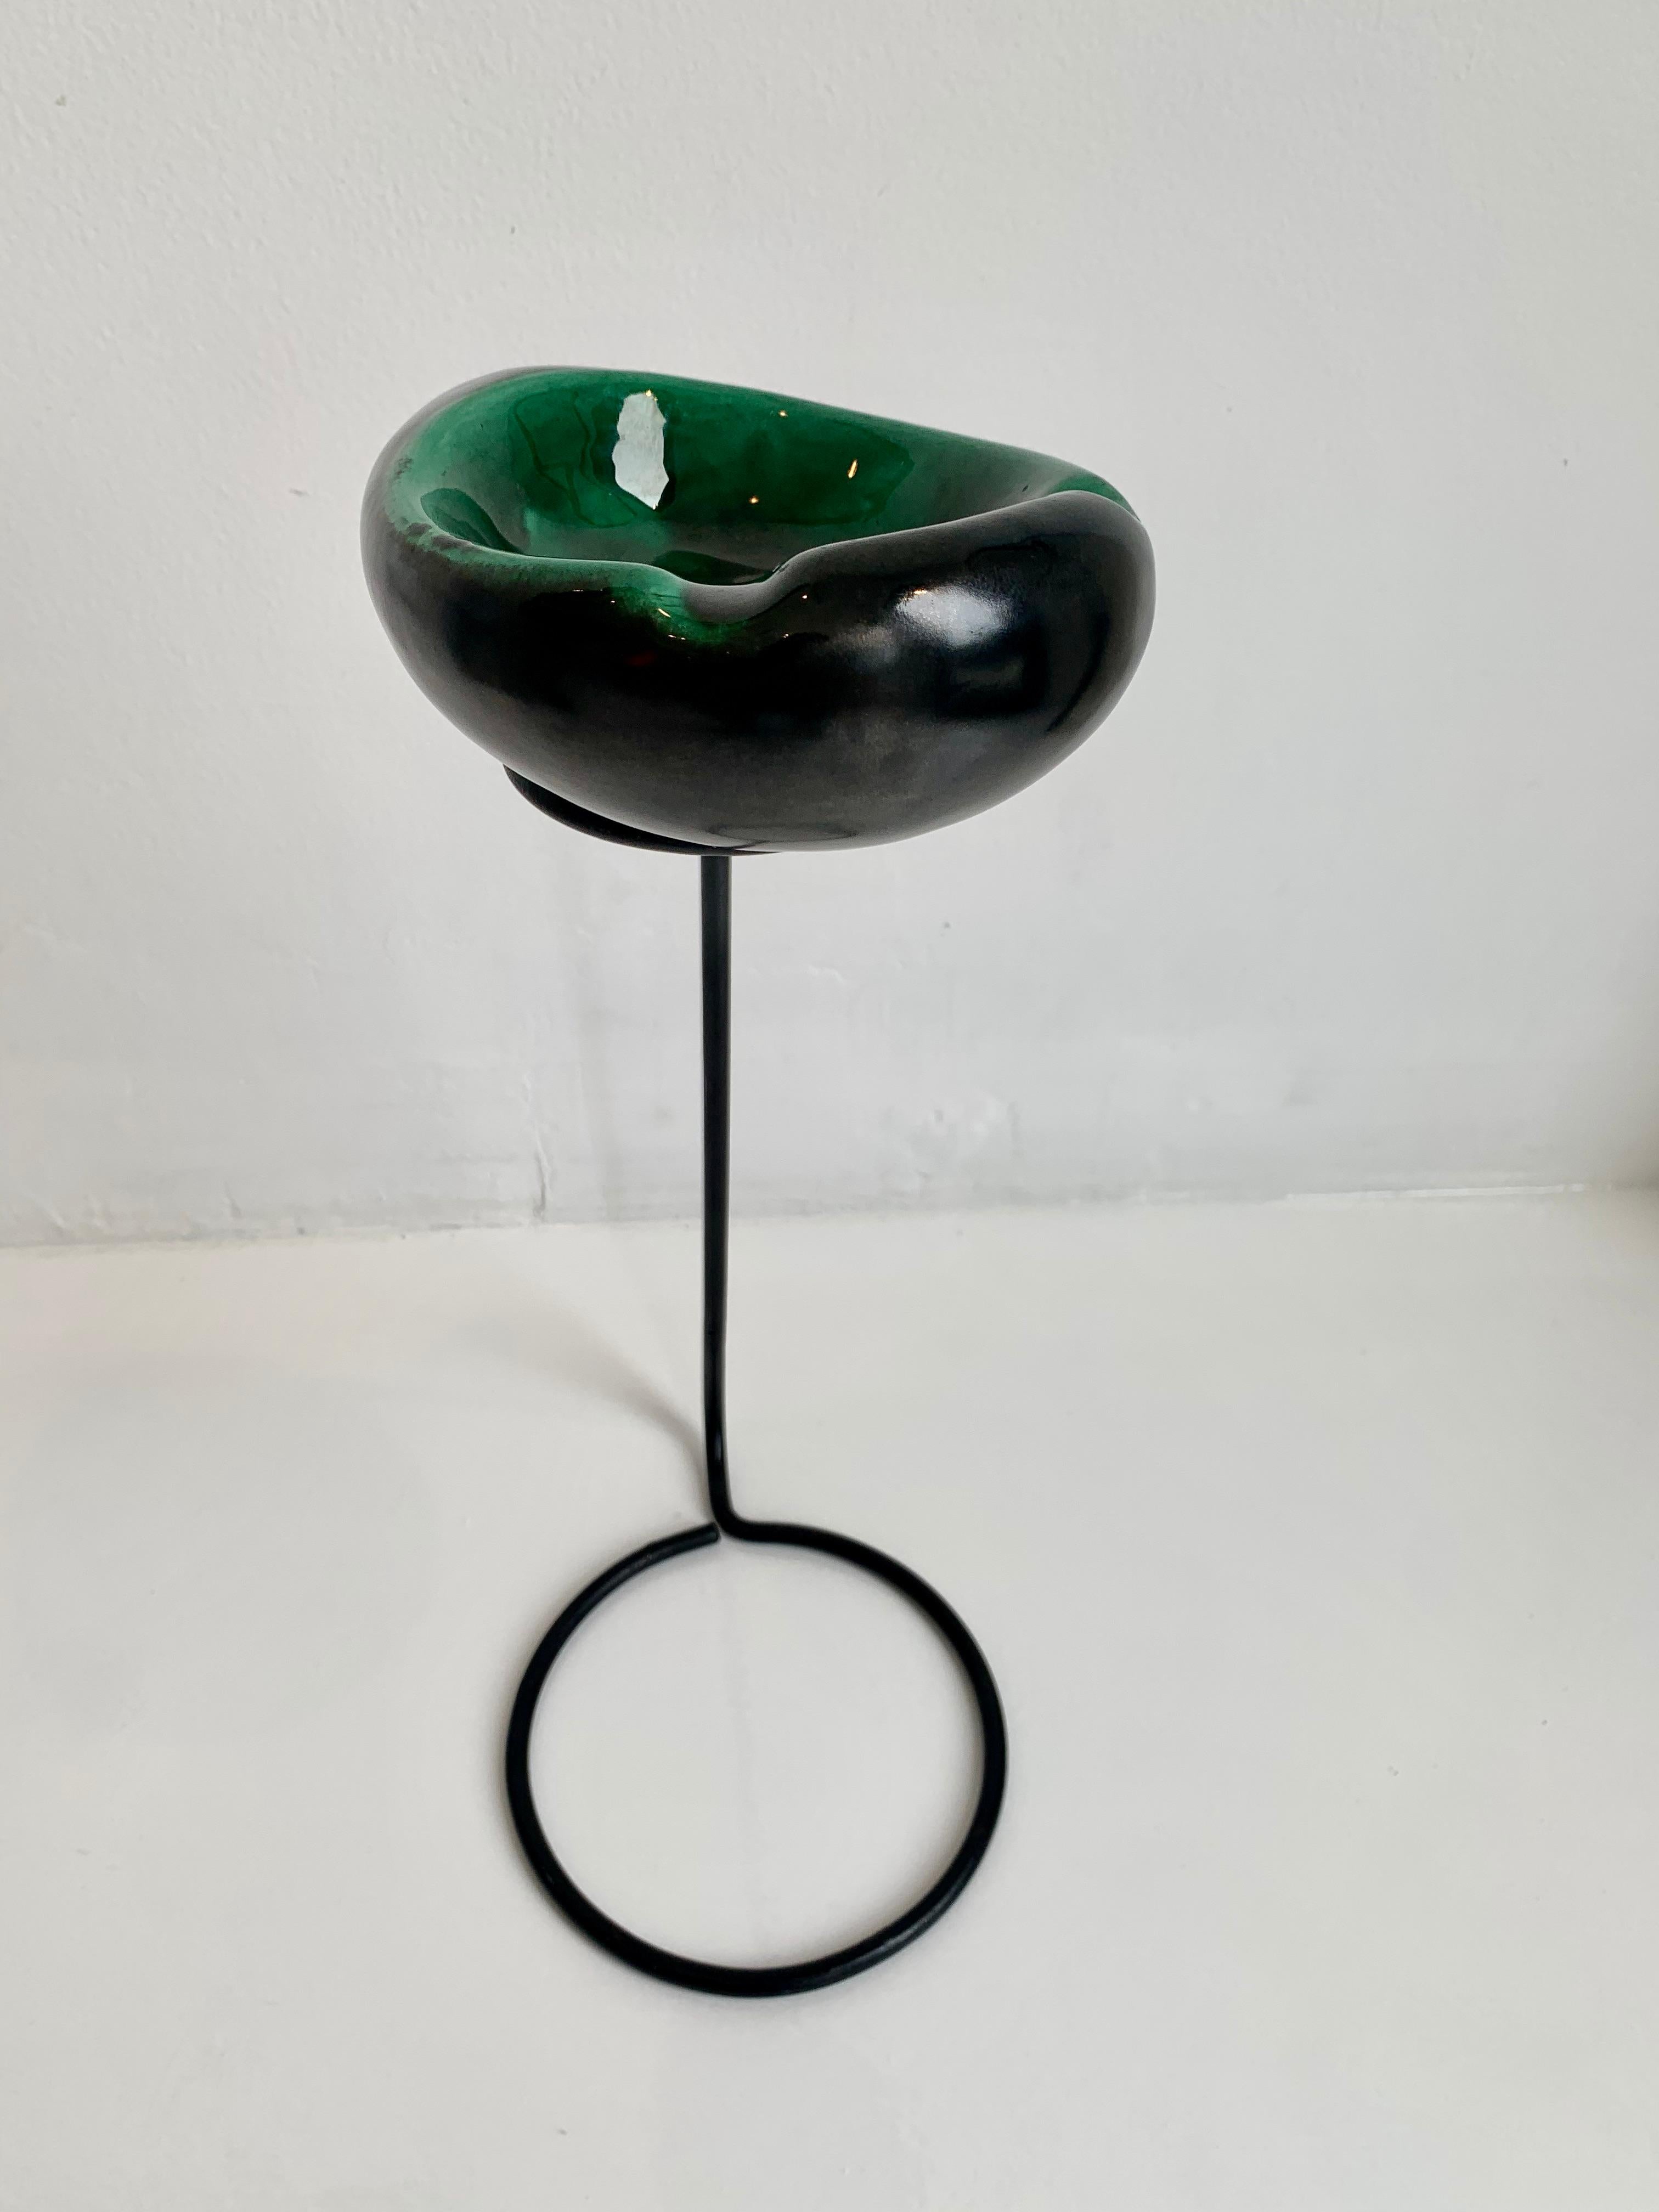 Sculptural ashtray/catchall in the style of Matégot and Georges Jouve. Iron frame with circular base and circular top. Green and black ceramic dish sits inside the metal opening. Great lines and coloring. Good vintage condition.